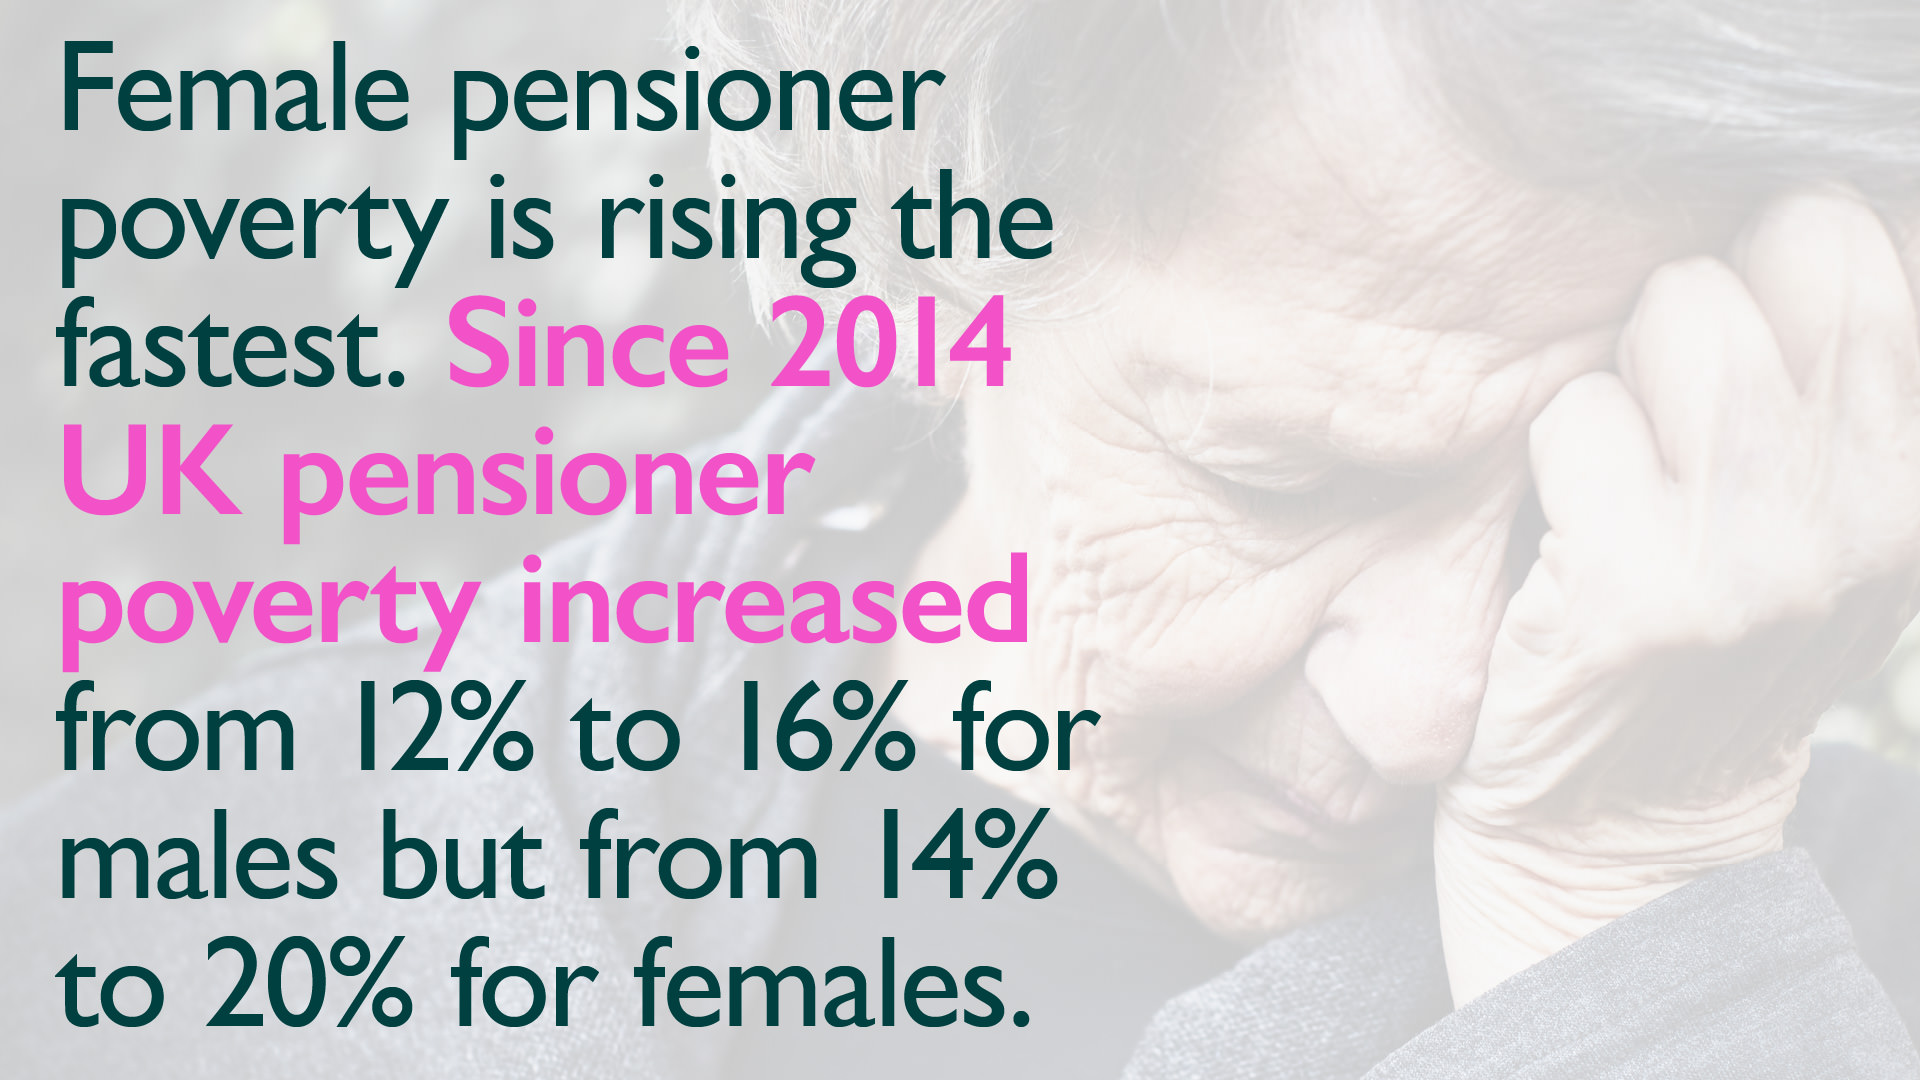 Female pensioner poverty is rising the fastest